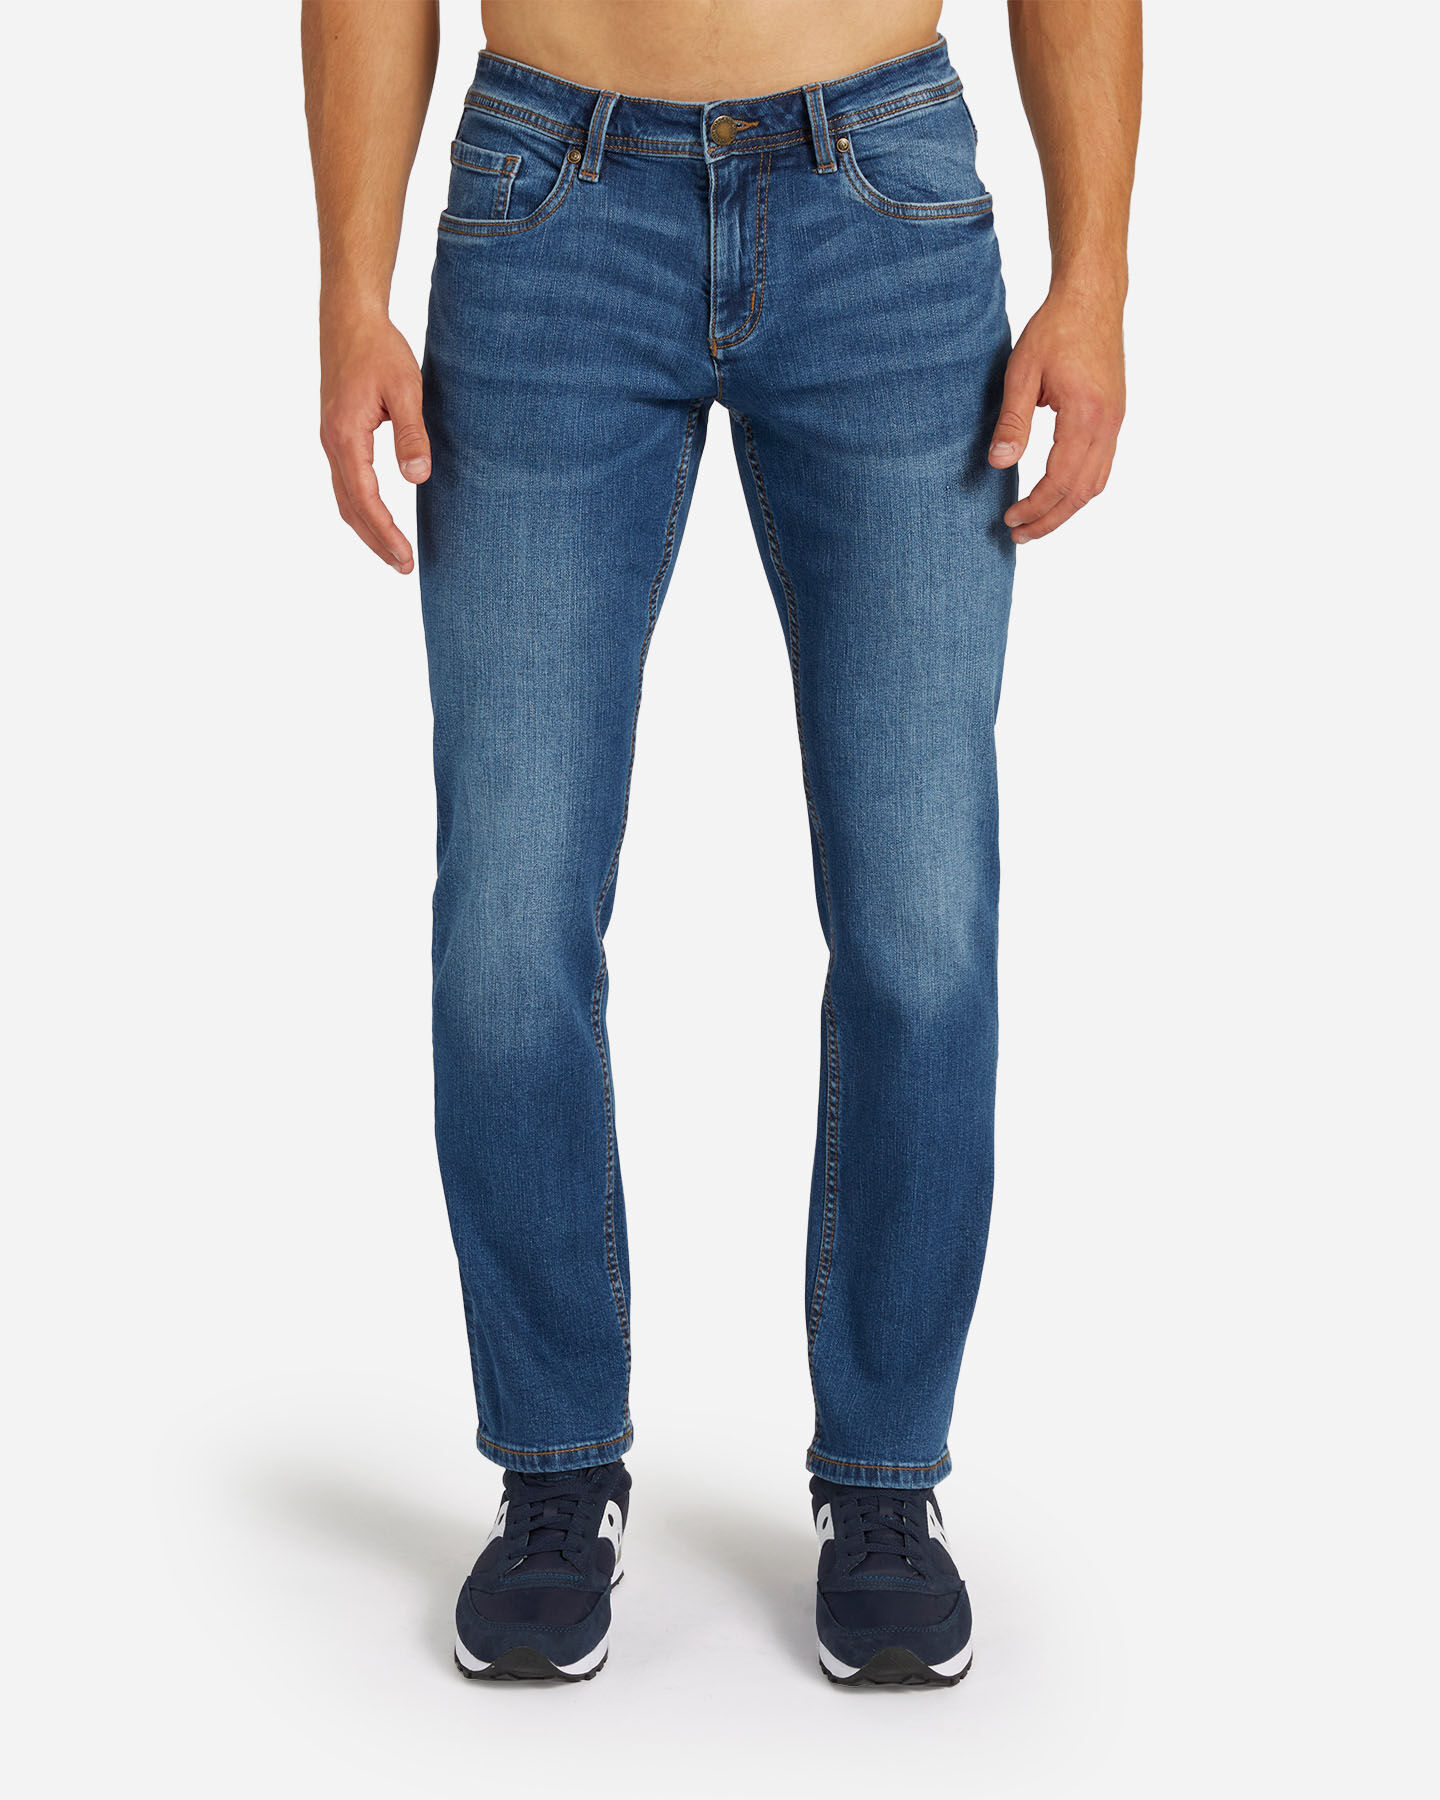  Jeans DACK'S CASUAL CITY M S4106781|MD|48 scatto 0